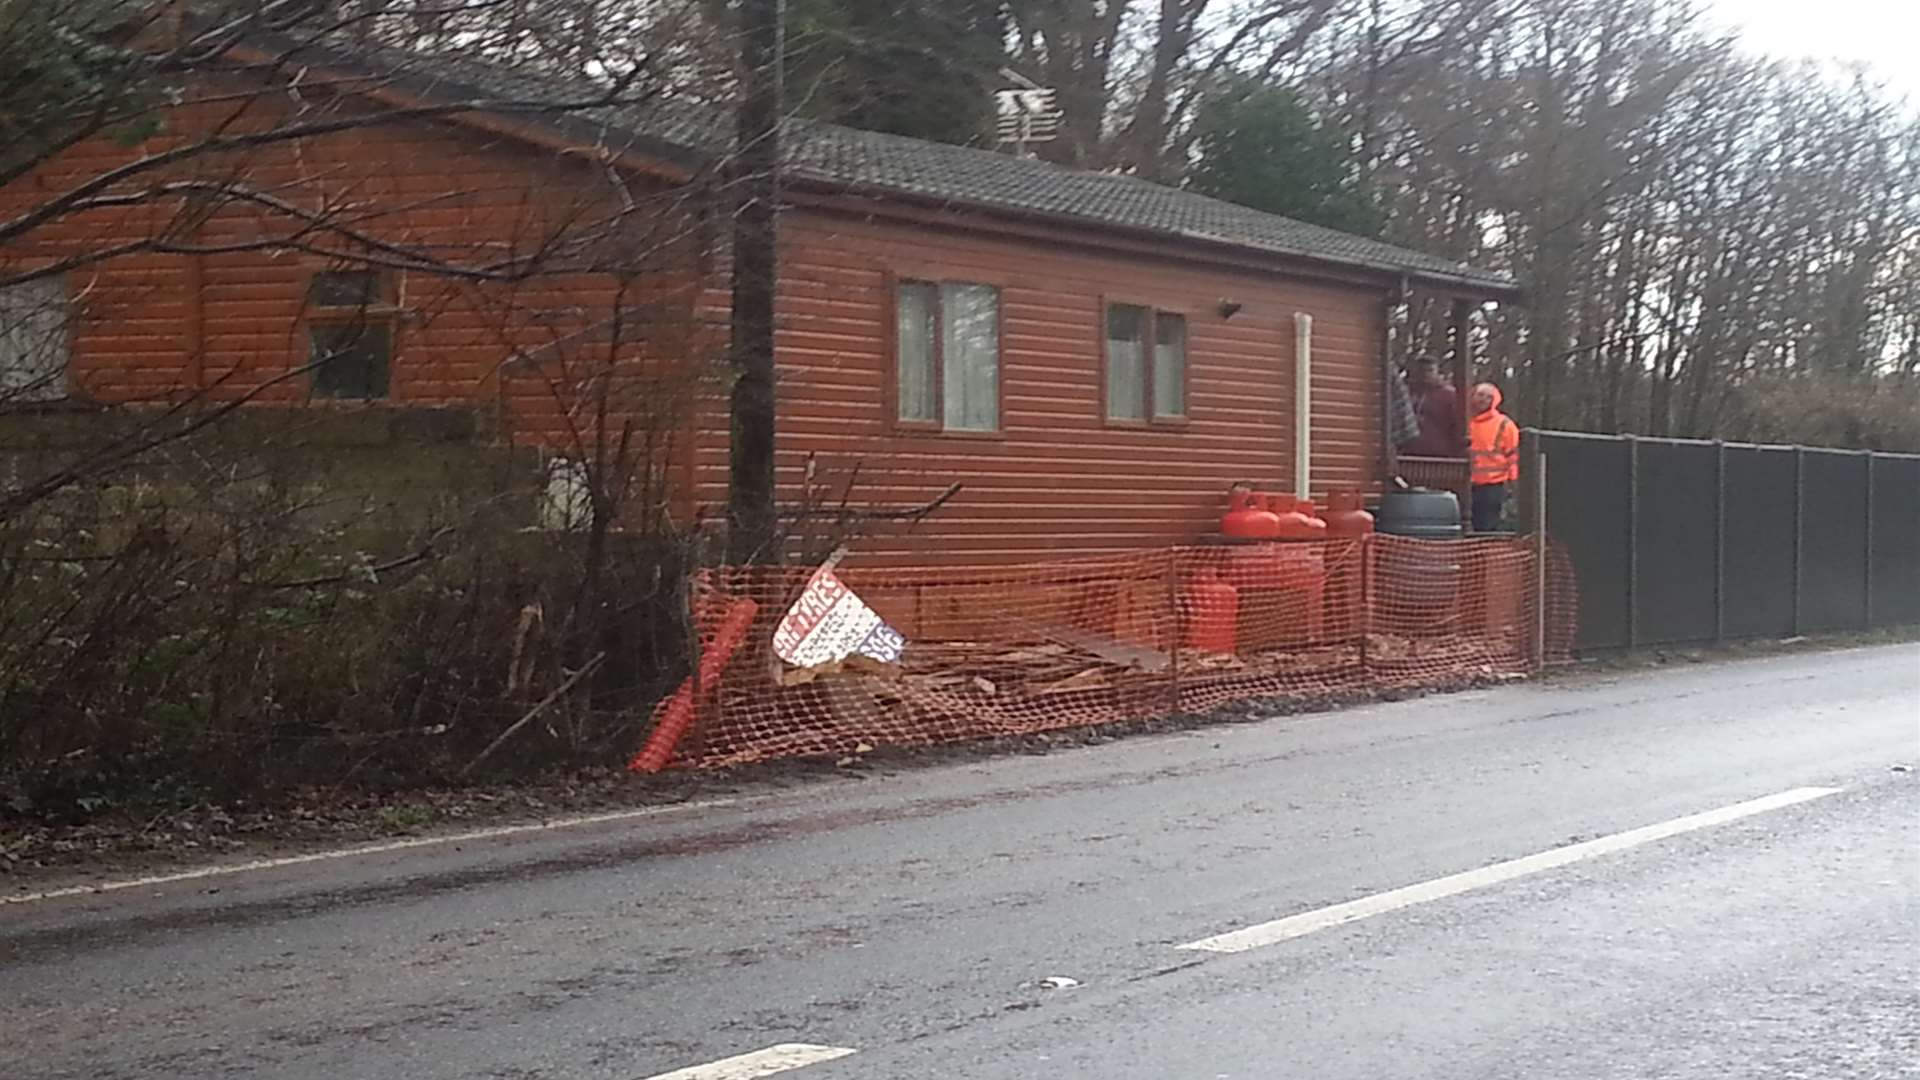 A car left the road and hit a fence